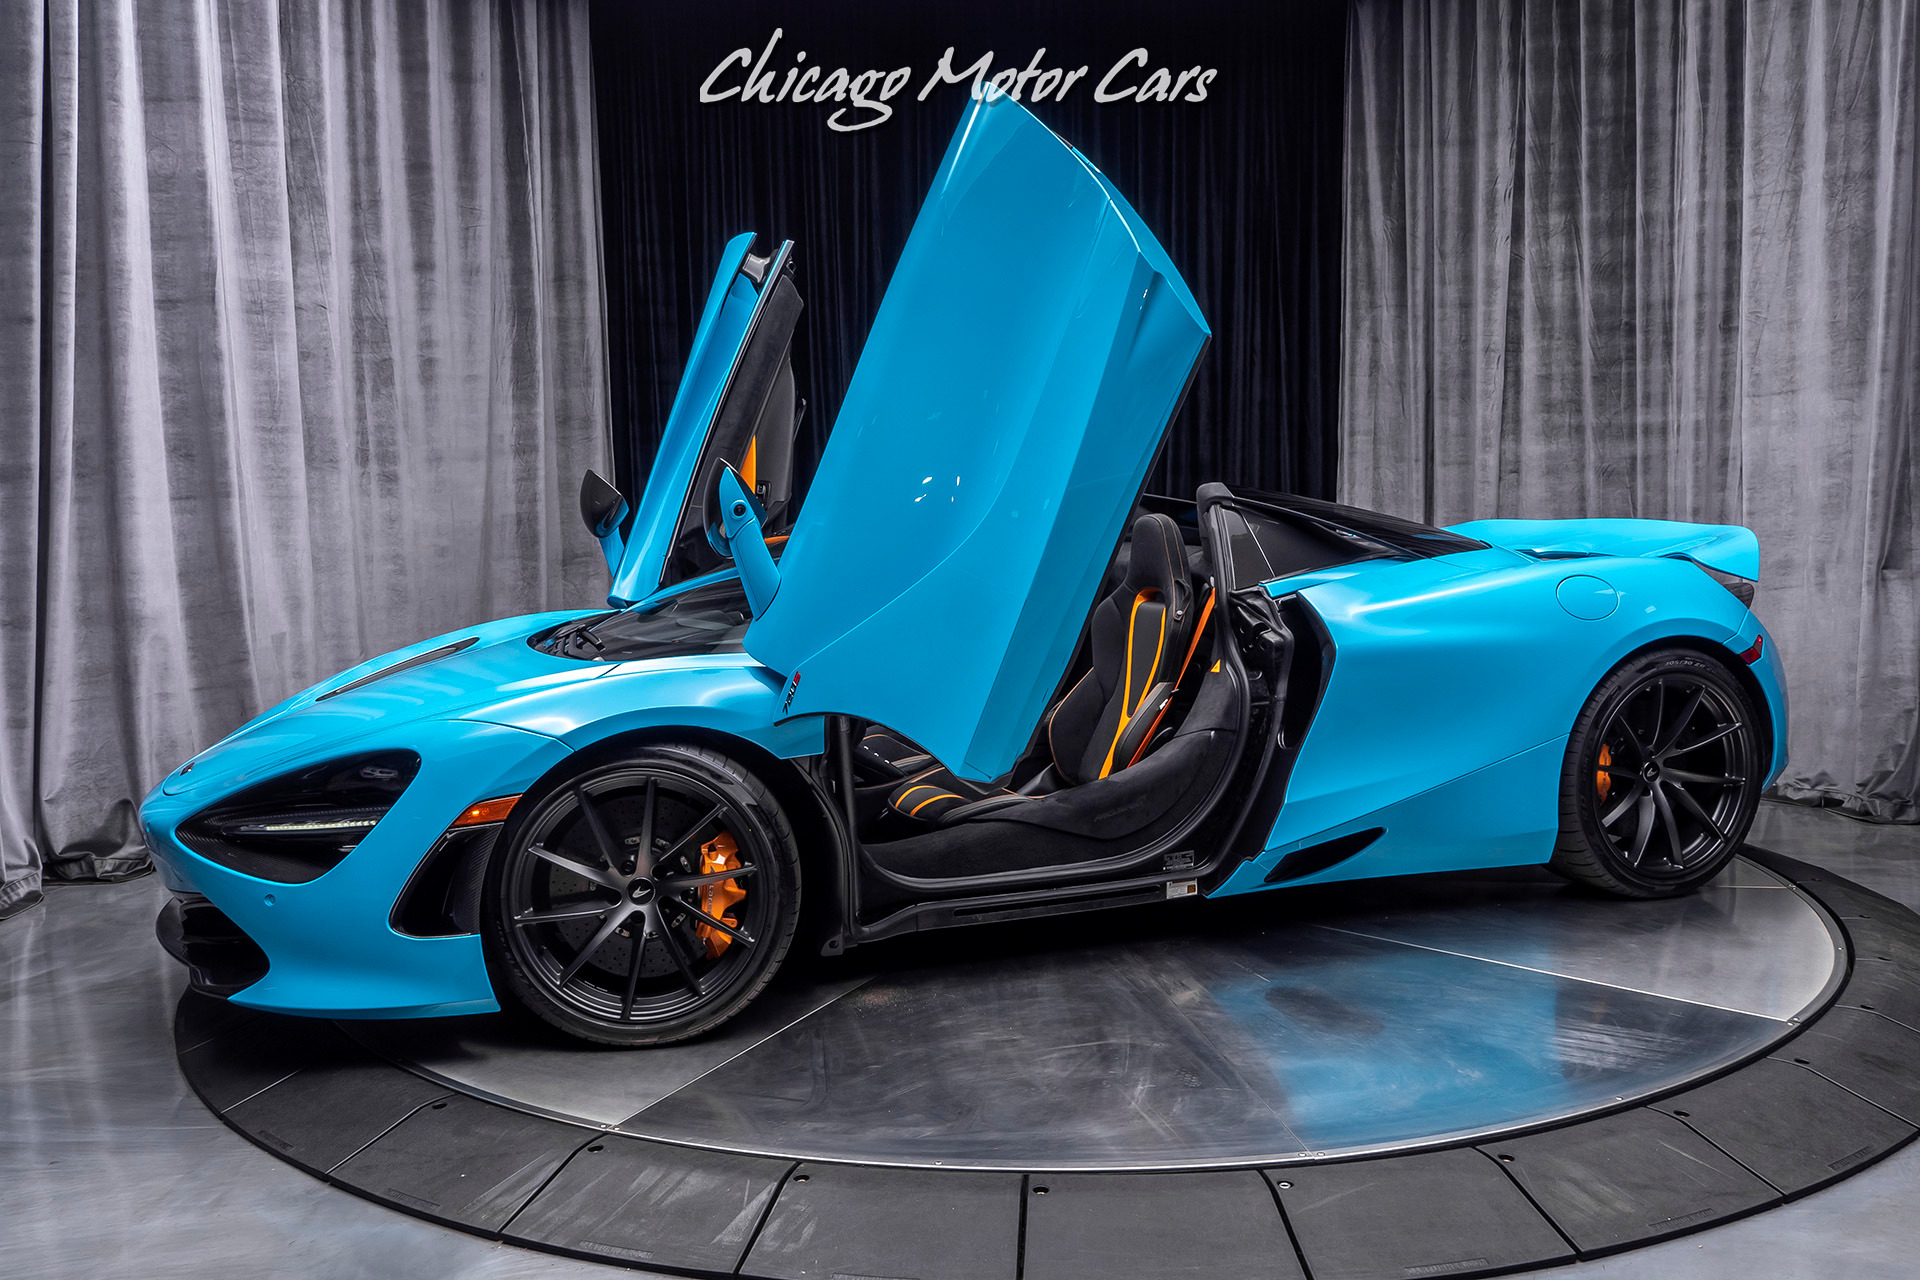 Used 2020 Mclaren 720s Spider Performance Fistral Blue Only